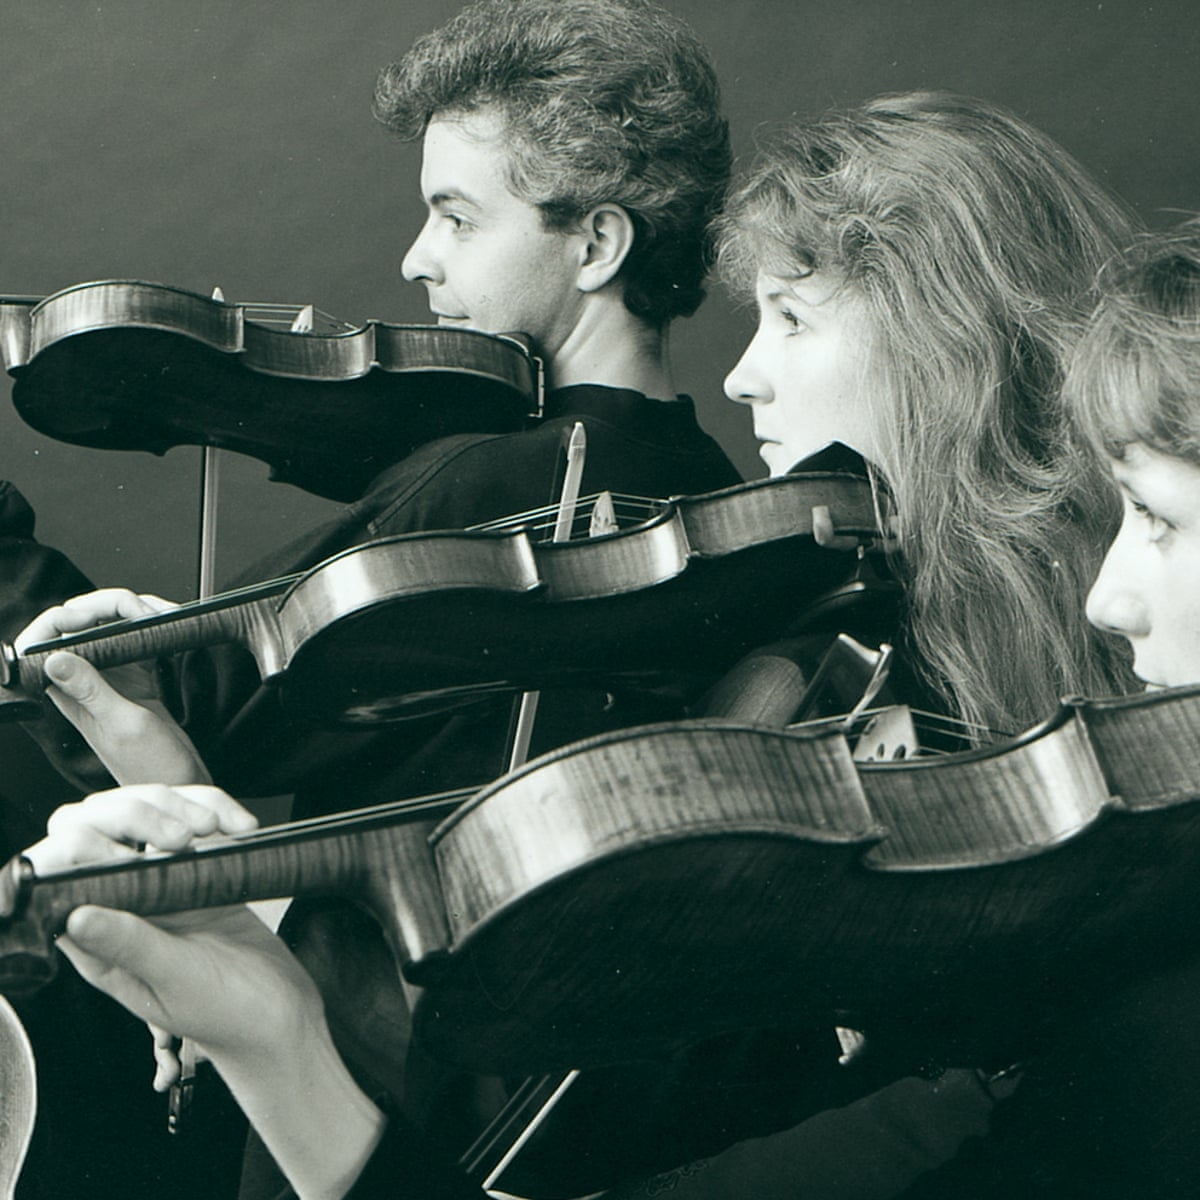 Britten: Music for String Quartet Review - The bright sound of the group illuminates the early works